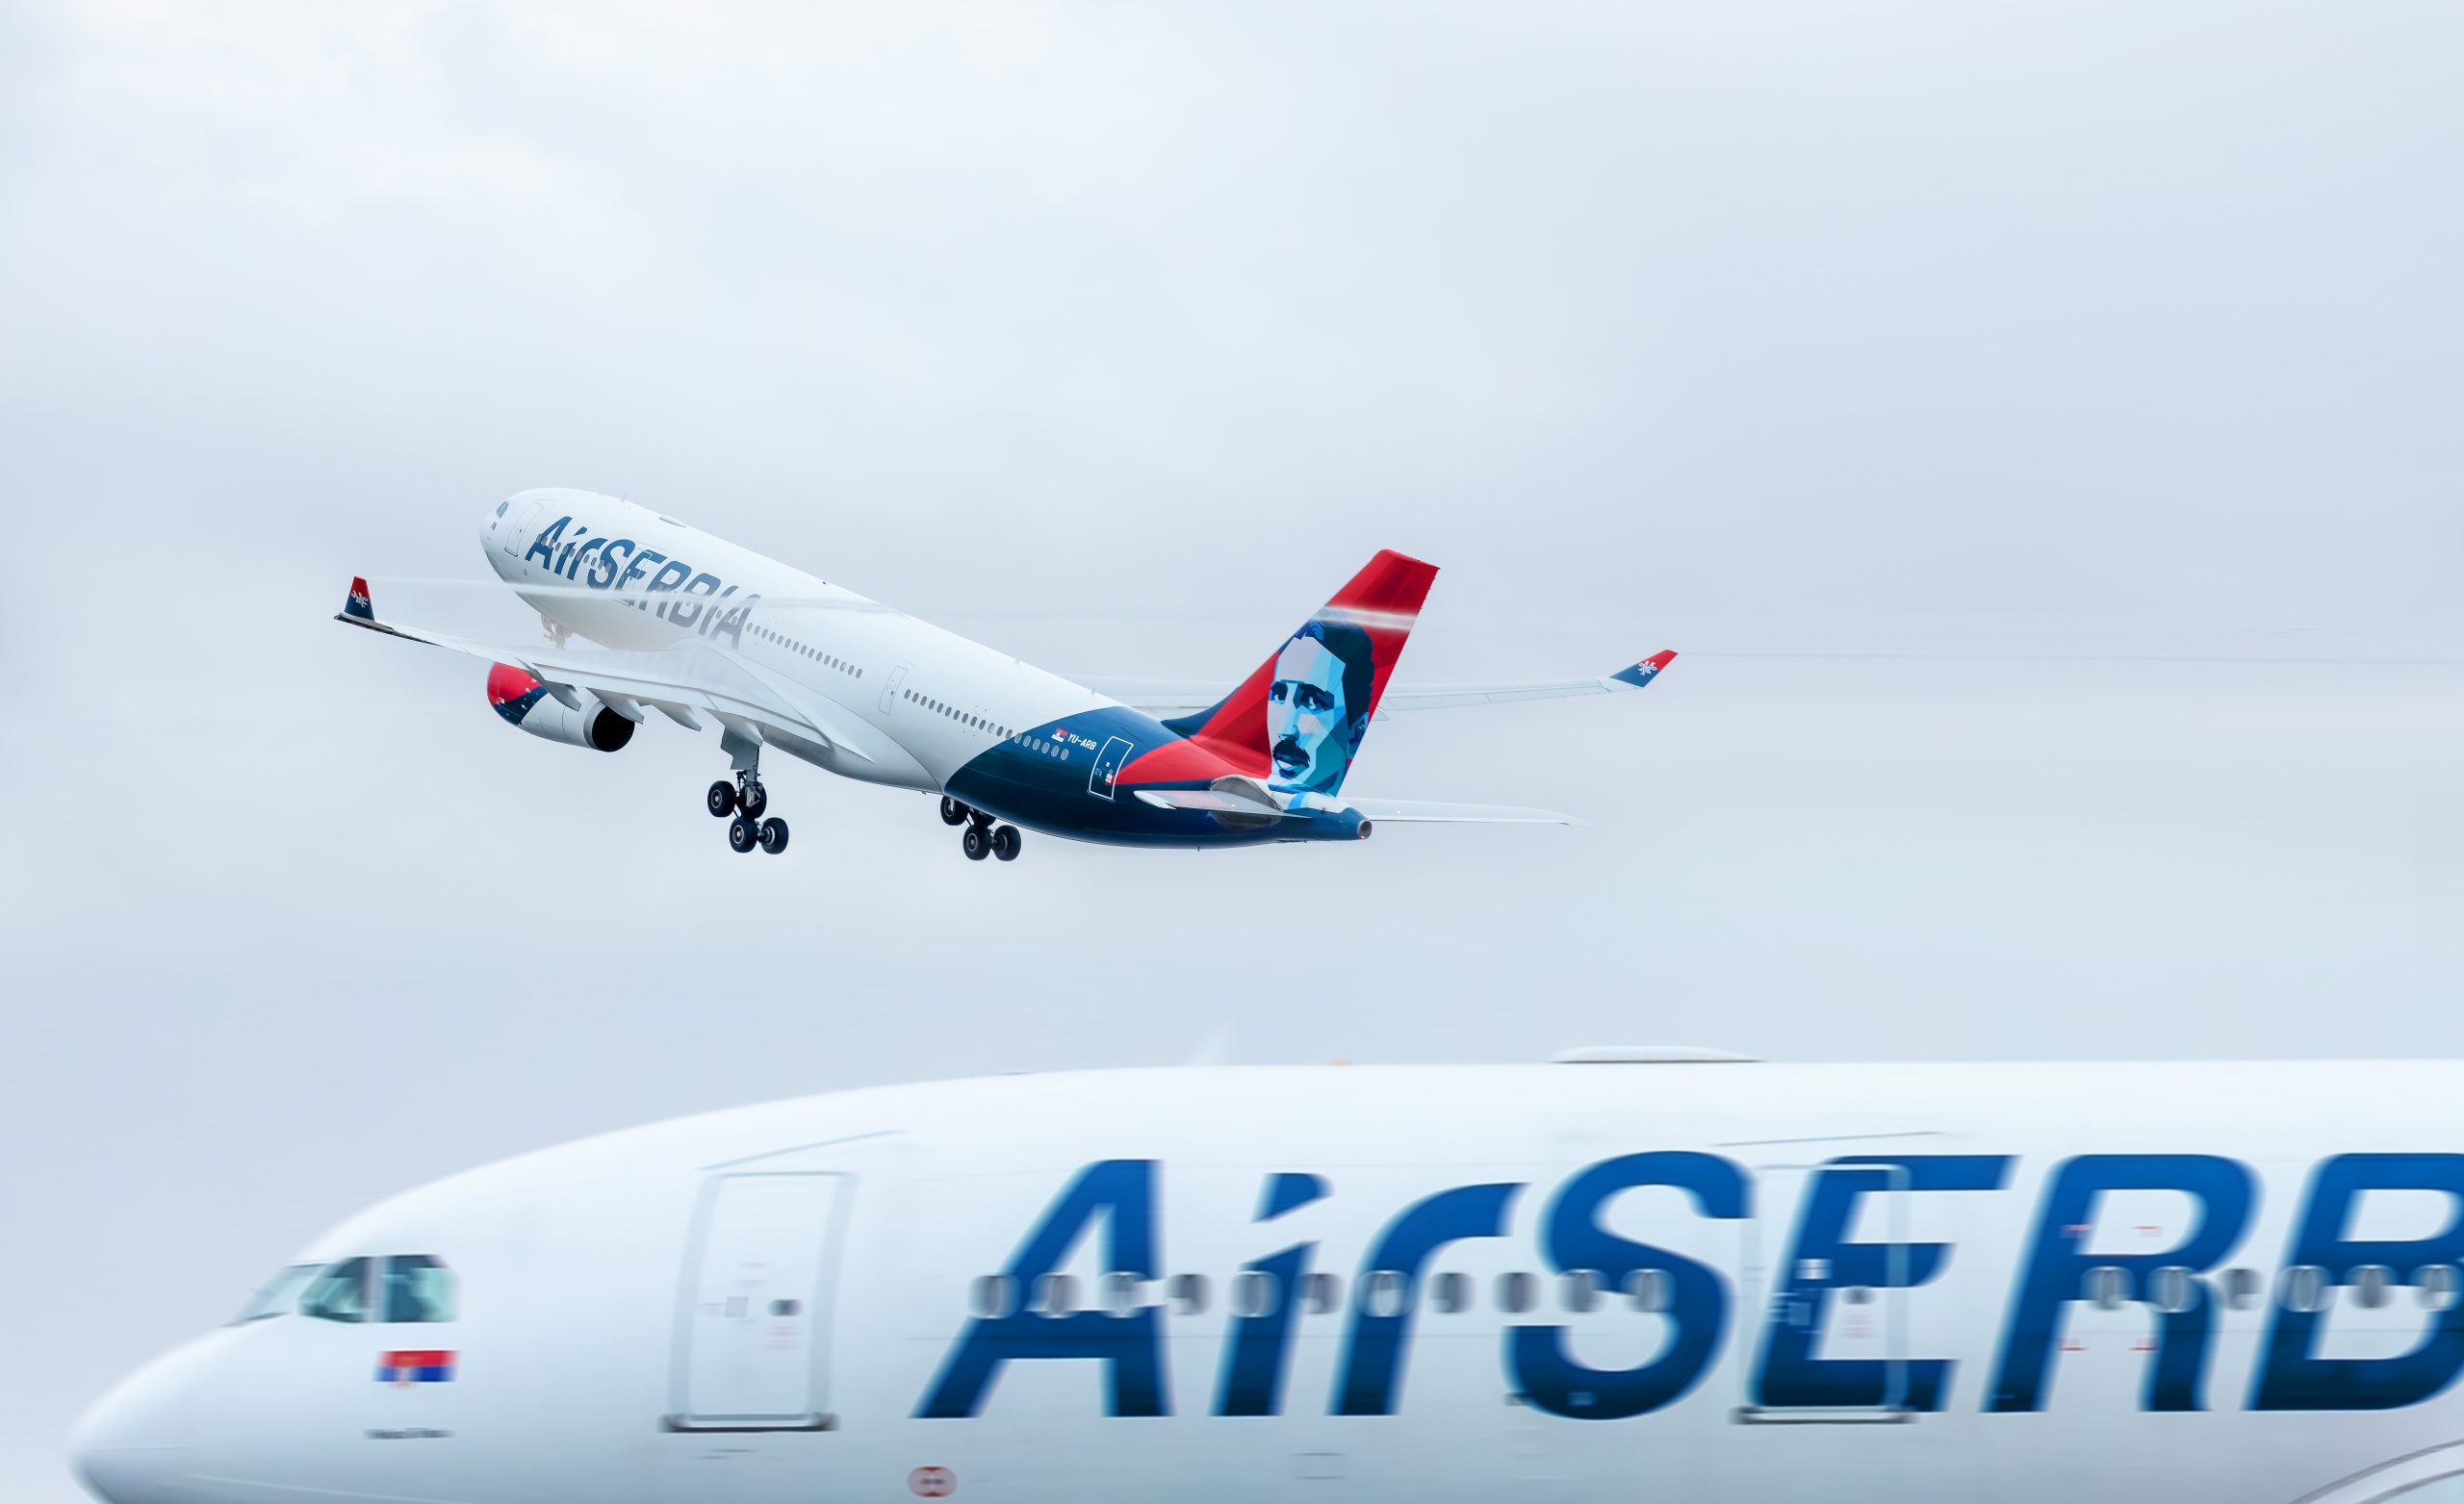 Photograph of two Air Serbia aircraft - one in the air and one in the foreground